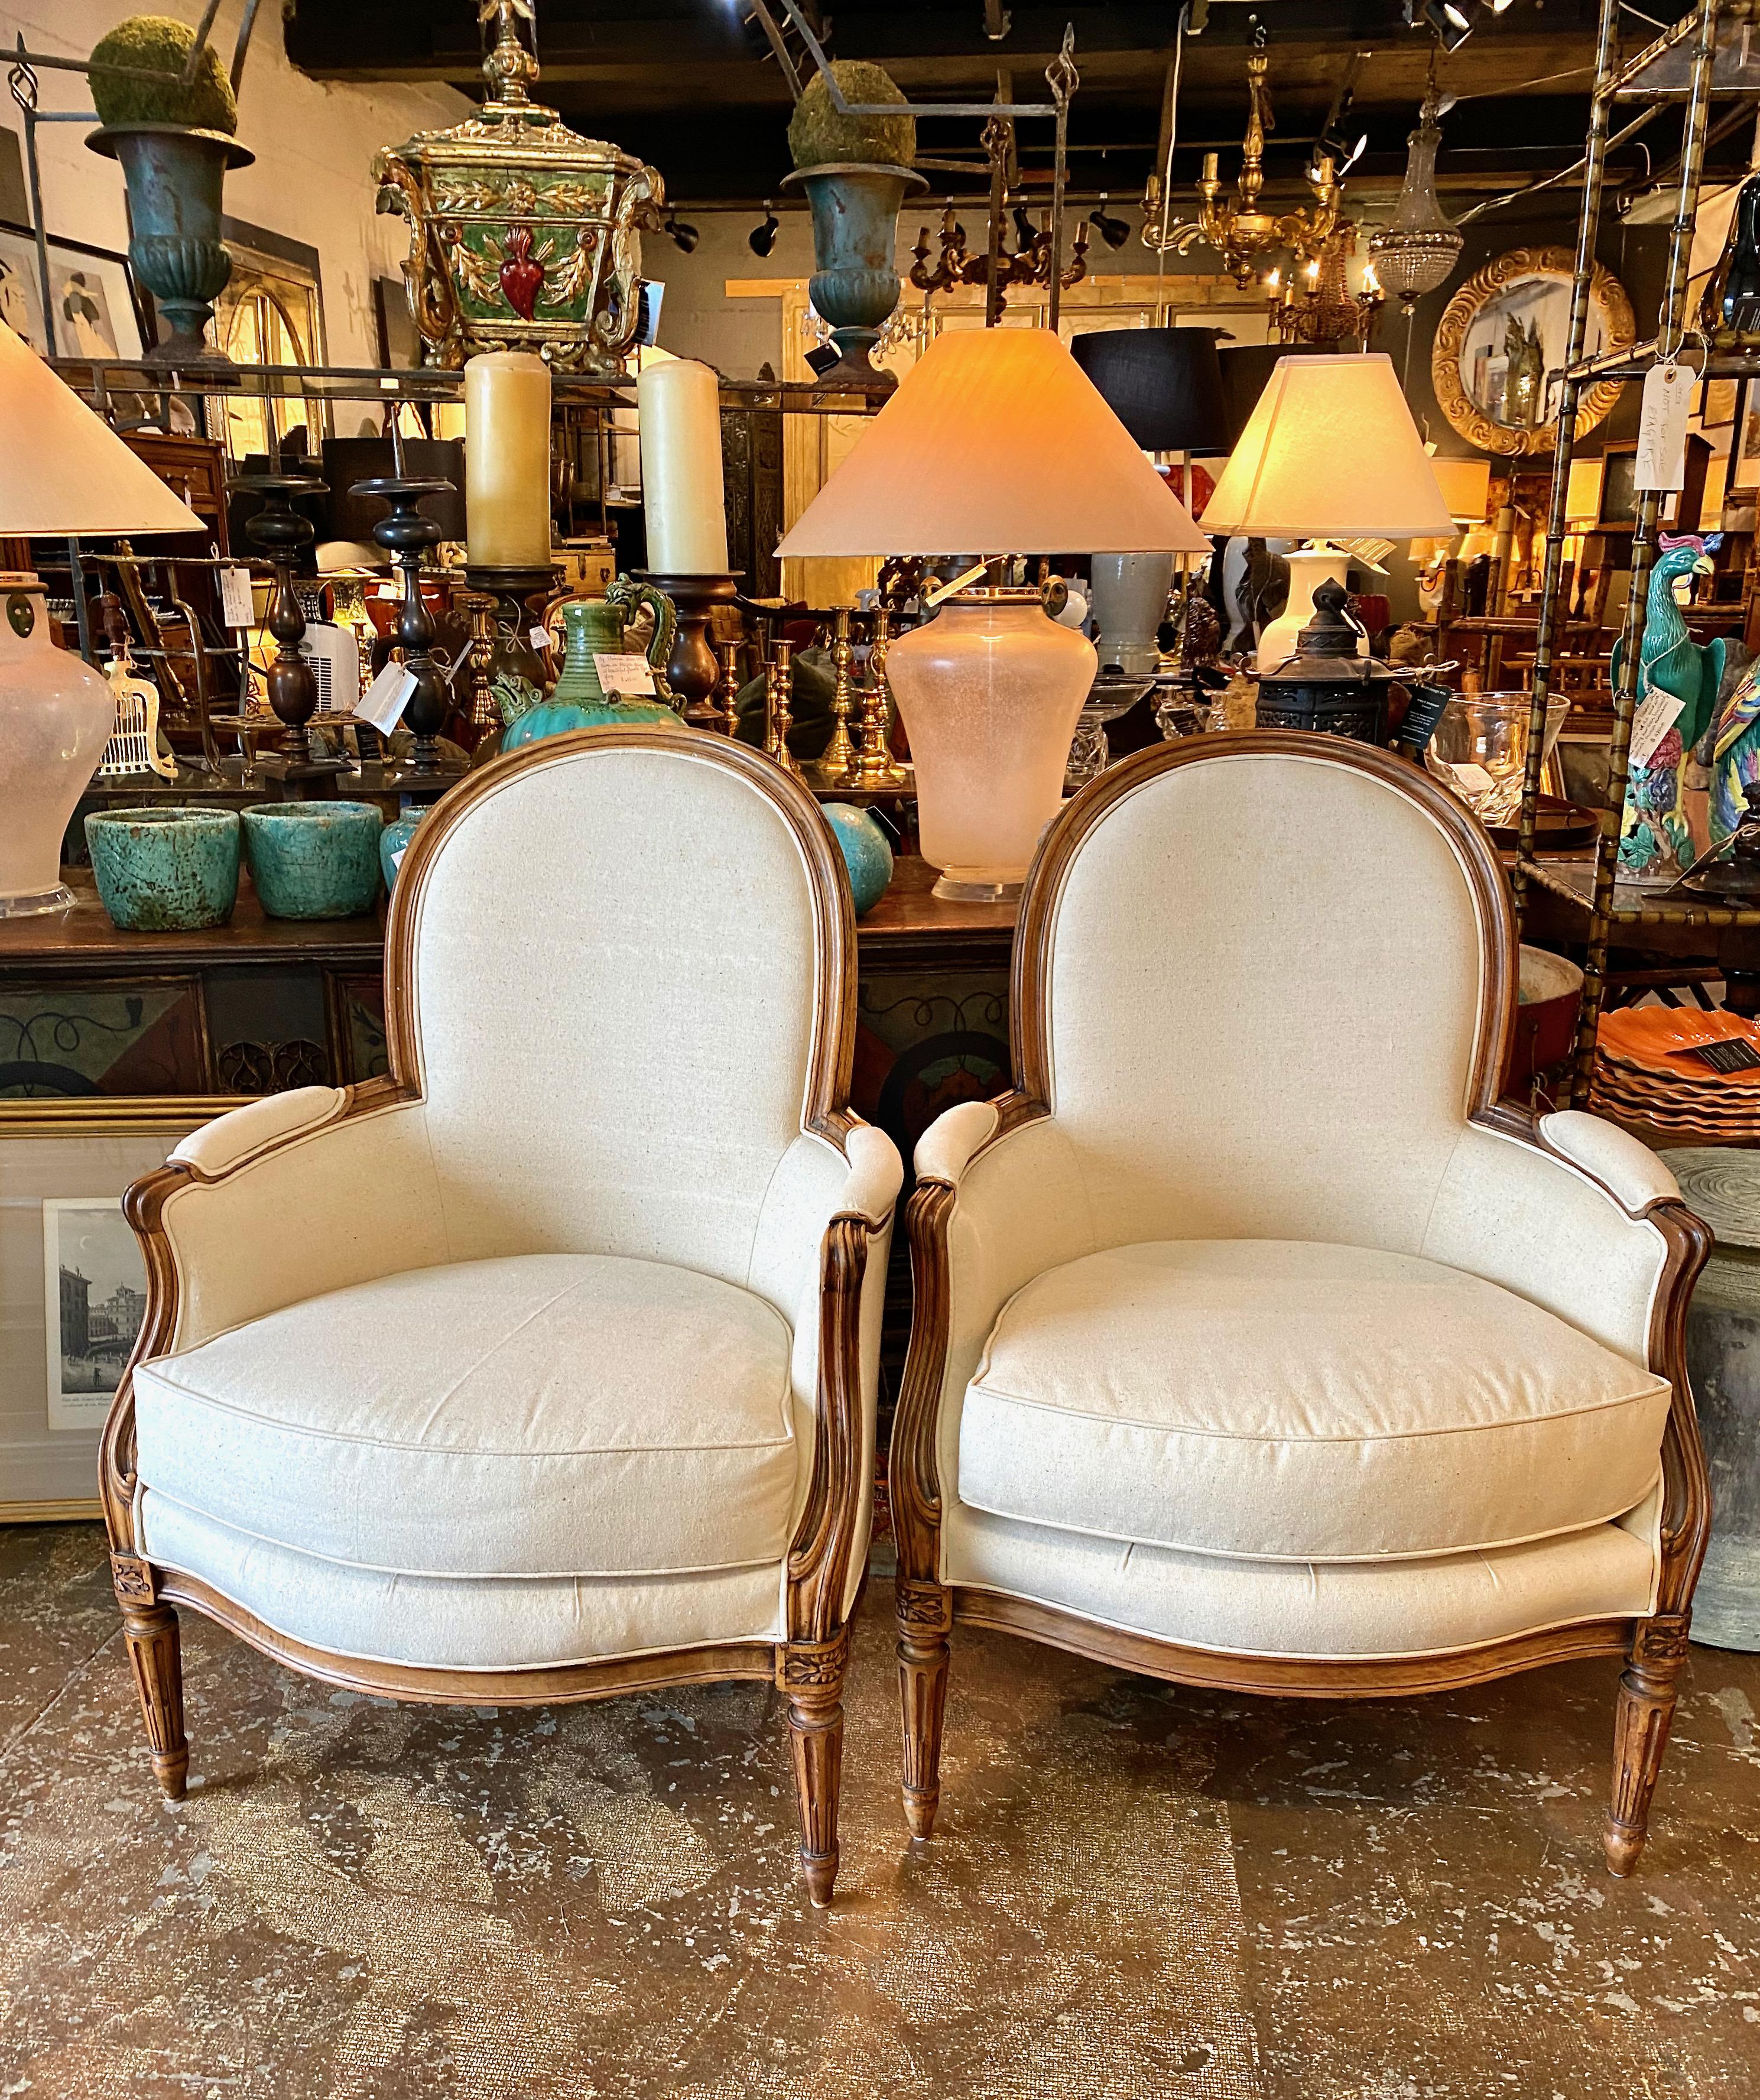 This is a classic pair of Louis XVI-style bergeres that date to the mid 19th century. The well-hand carved frames appear to retain their original surface in very good condition. The chairs are generously proportioned and are newly upholstered in a